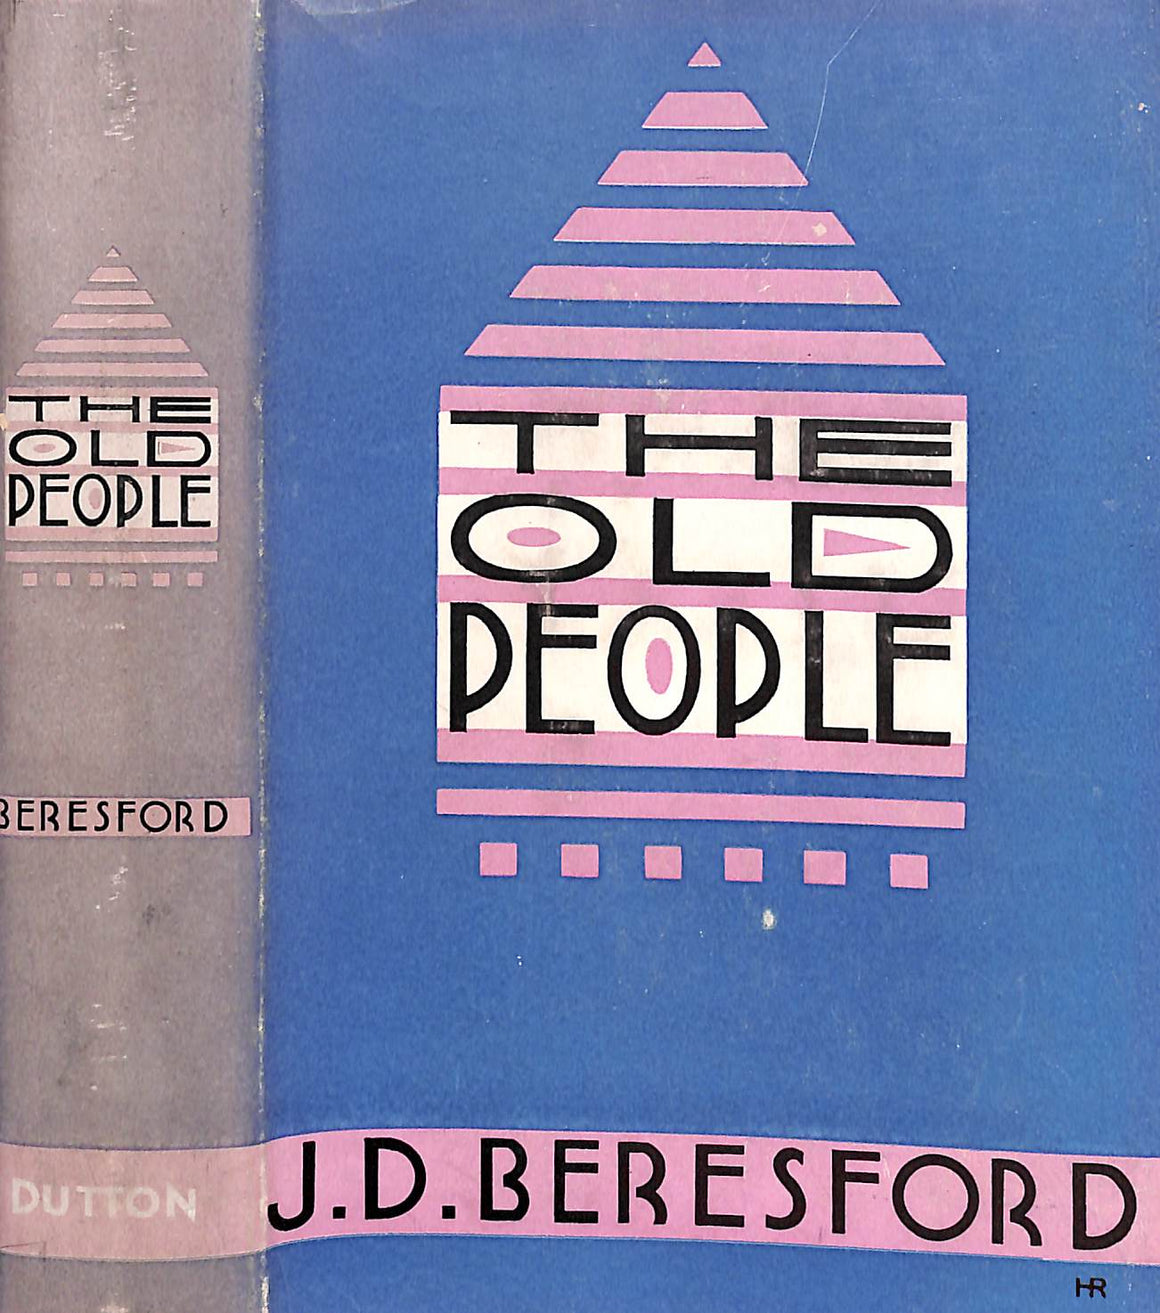 "The Old People" 1932 BERESFORD, J.D.